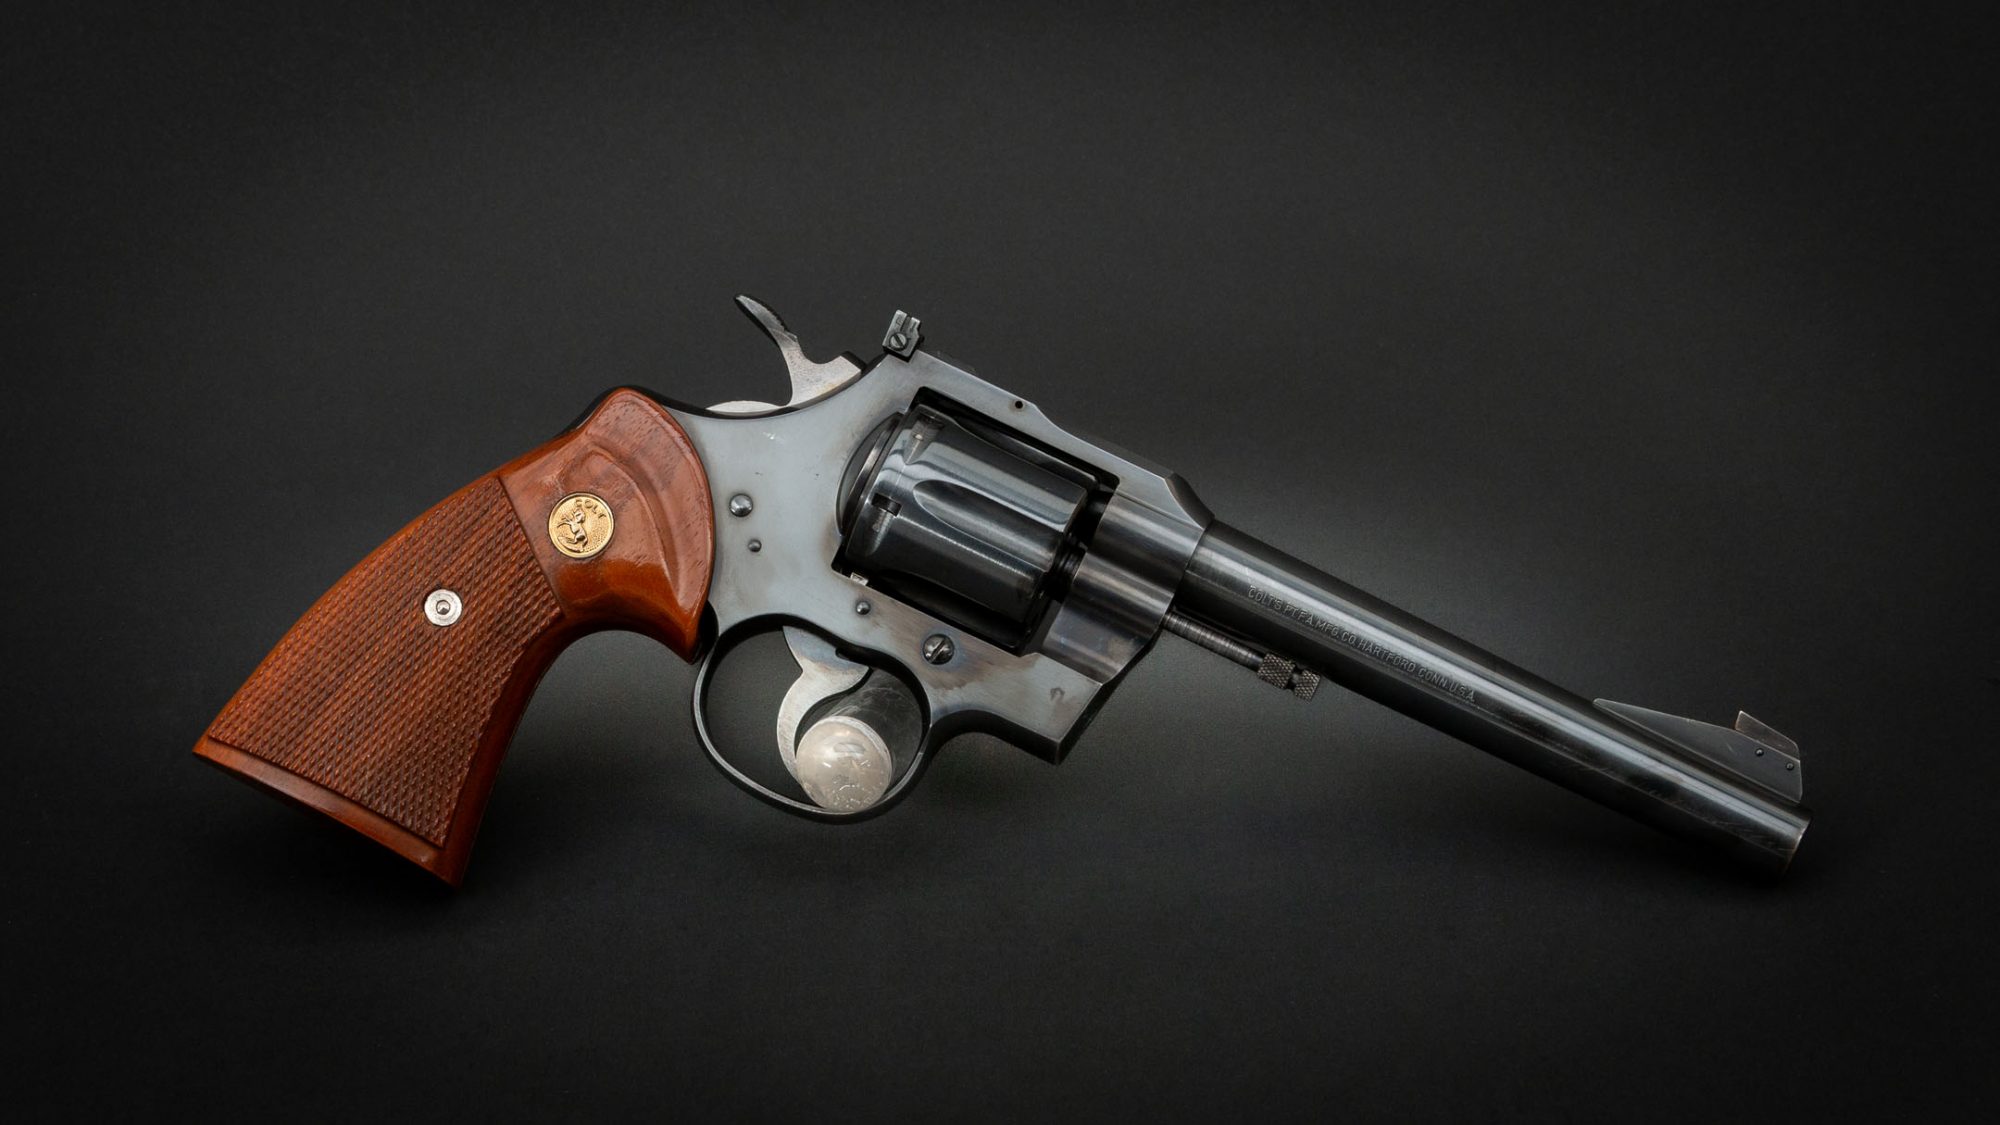 Colt Officers Model Match revolver in .22 Long Rifle, for sale by Turnbull Restoration Co. of Bloomfield, NY